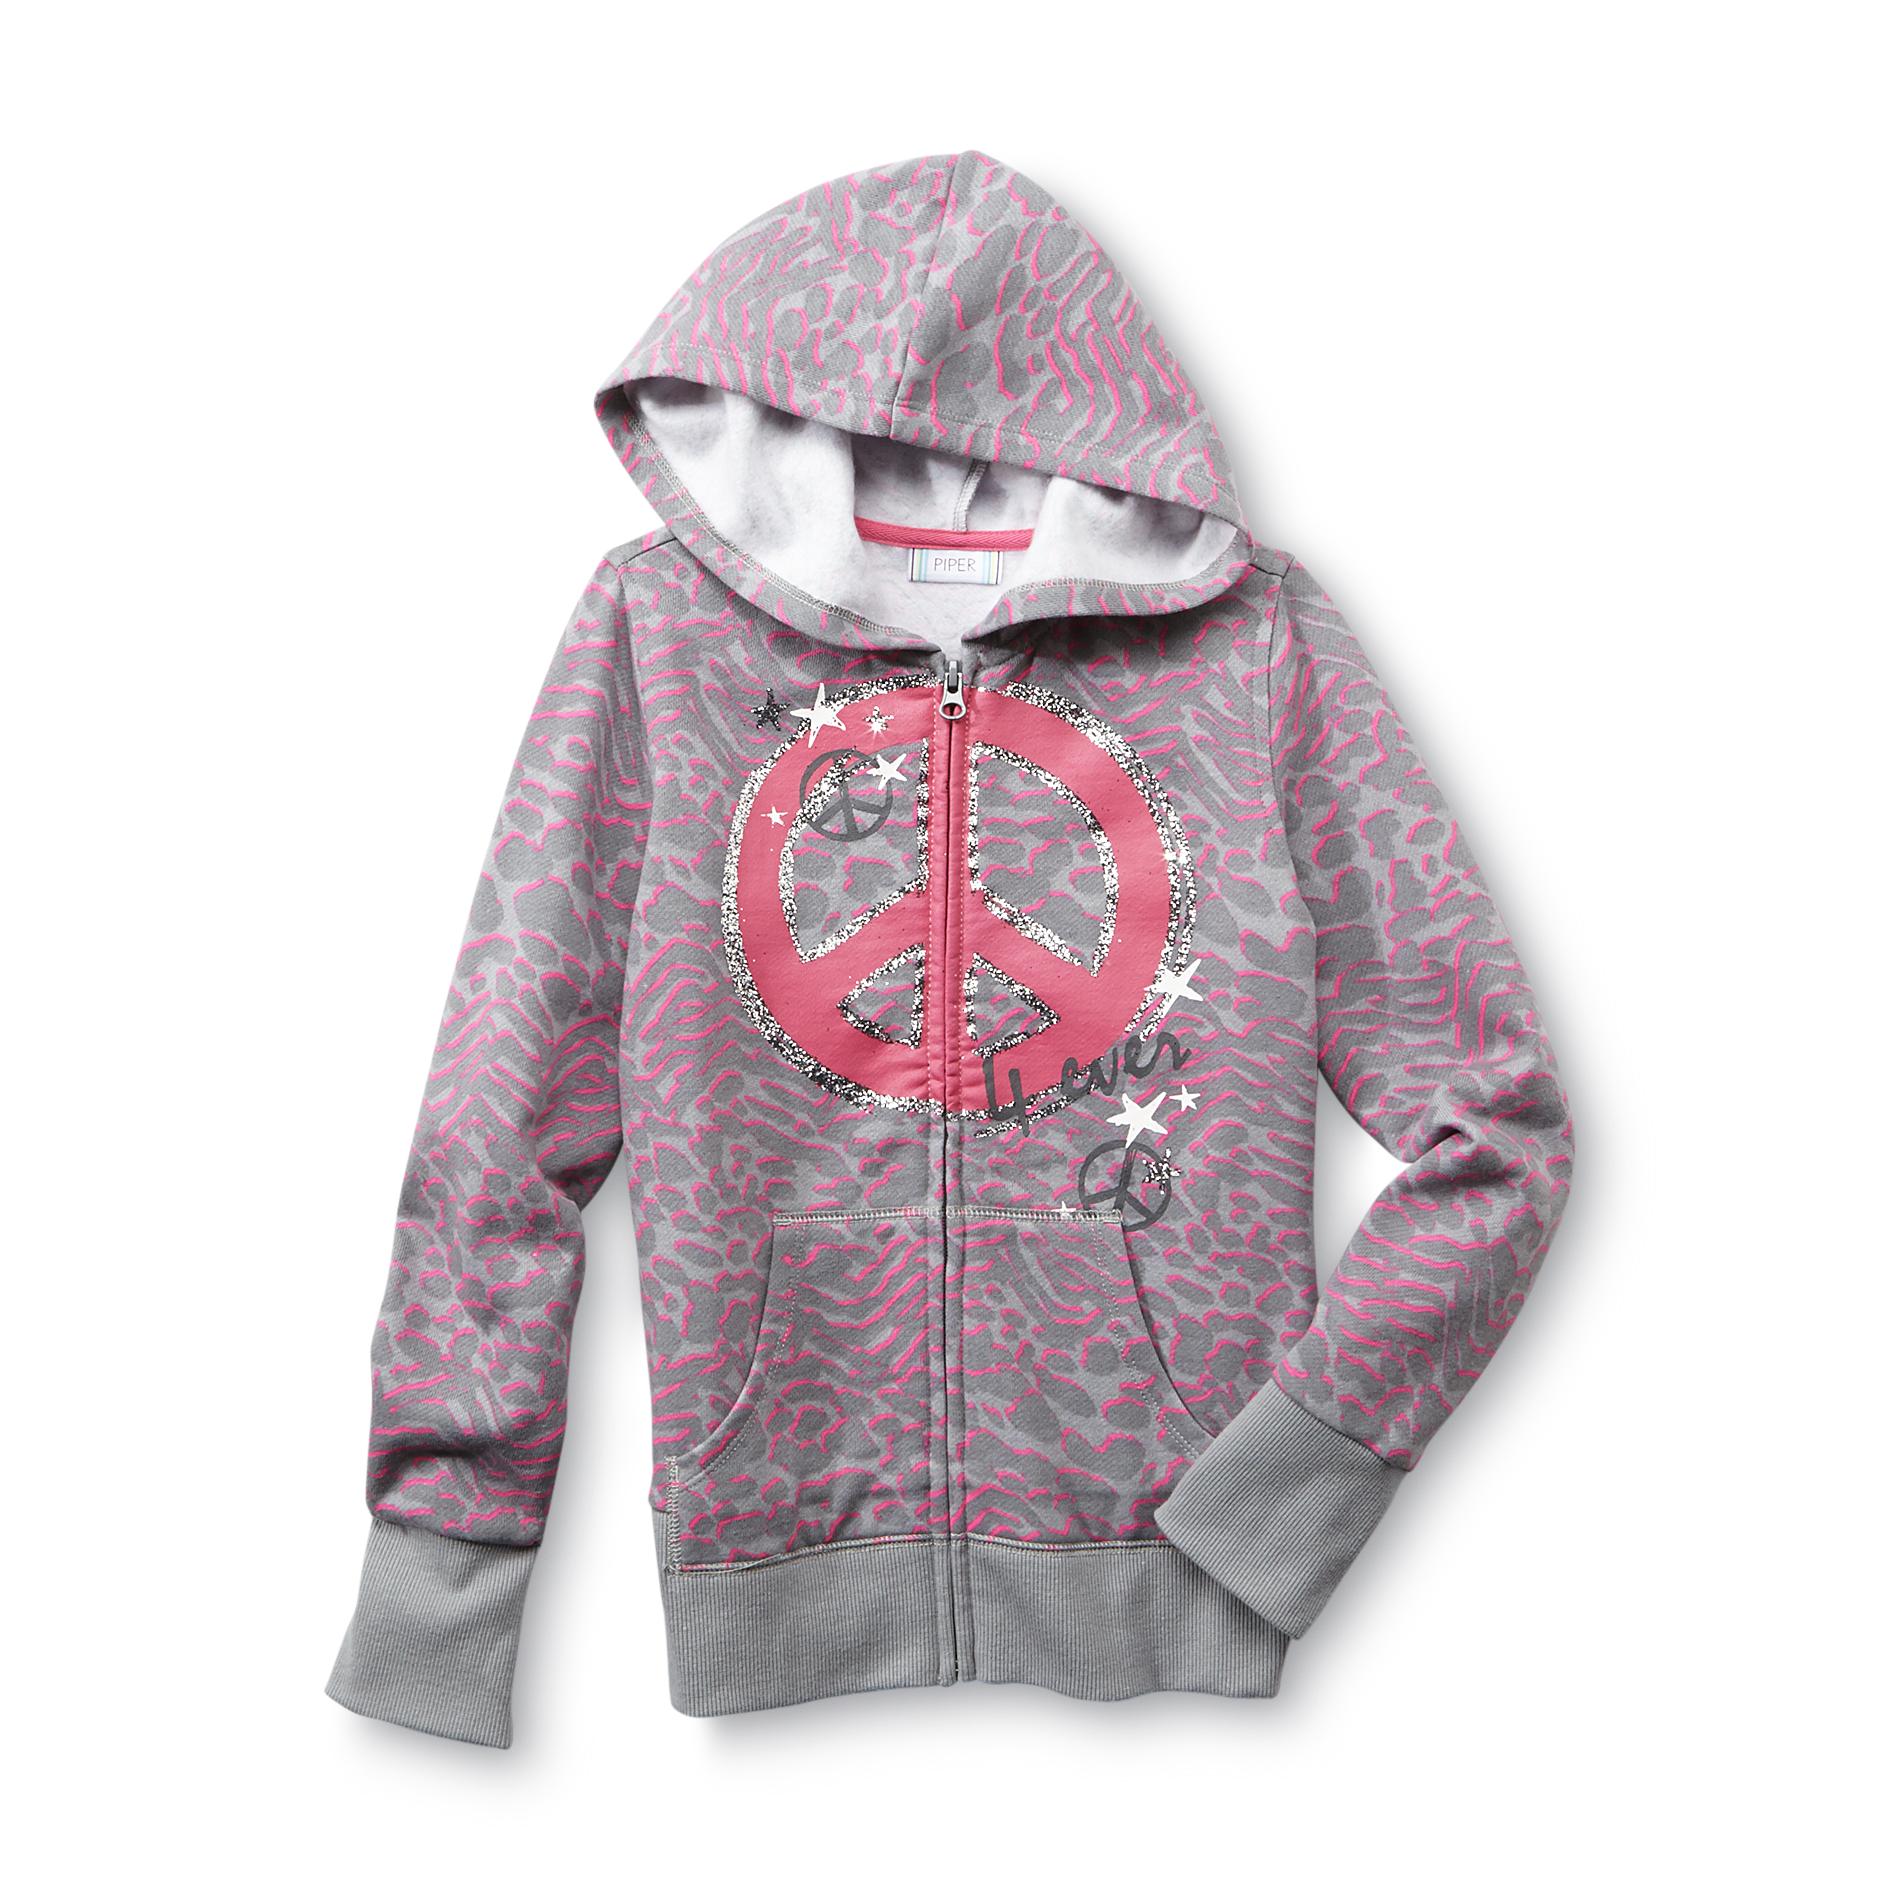 Piper Girl's Graphic Hoodie Jacket - Peace 4 Ever